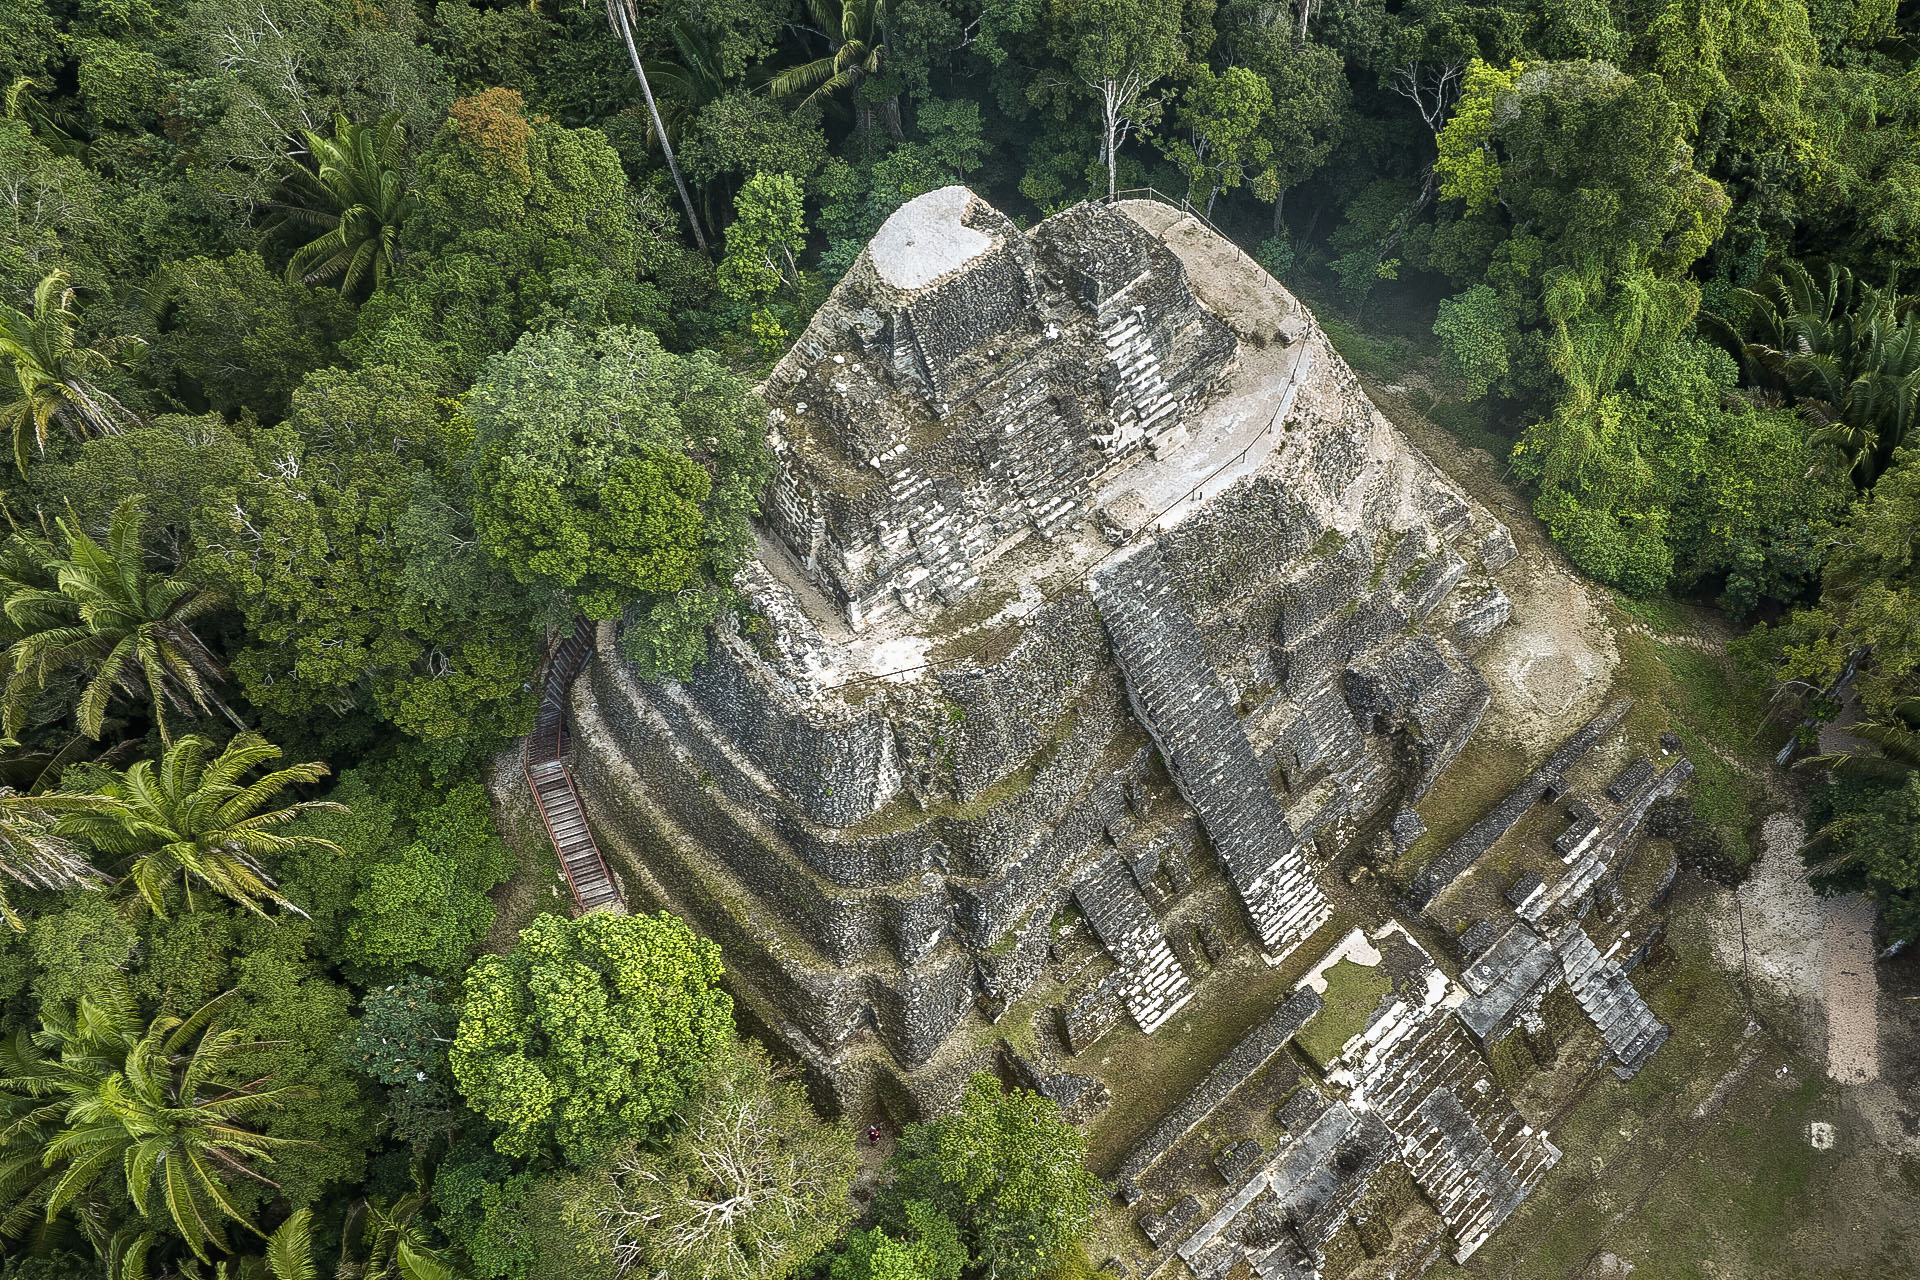 Aerial image of High Temple at Lamanai, Belize, enveloped by dense jungle. The temple, a large pyramid-like structure constructed of limestone, rises prominently above the treeline.